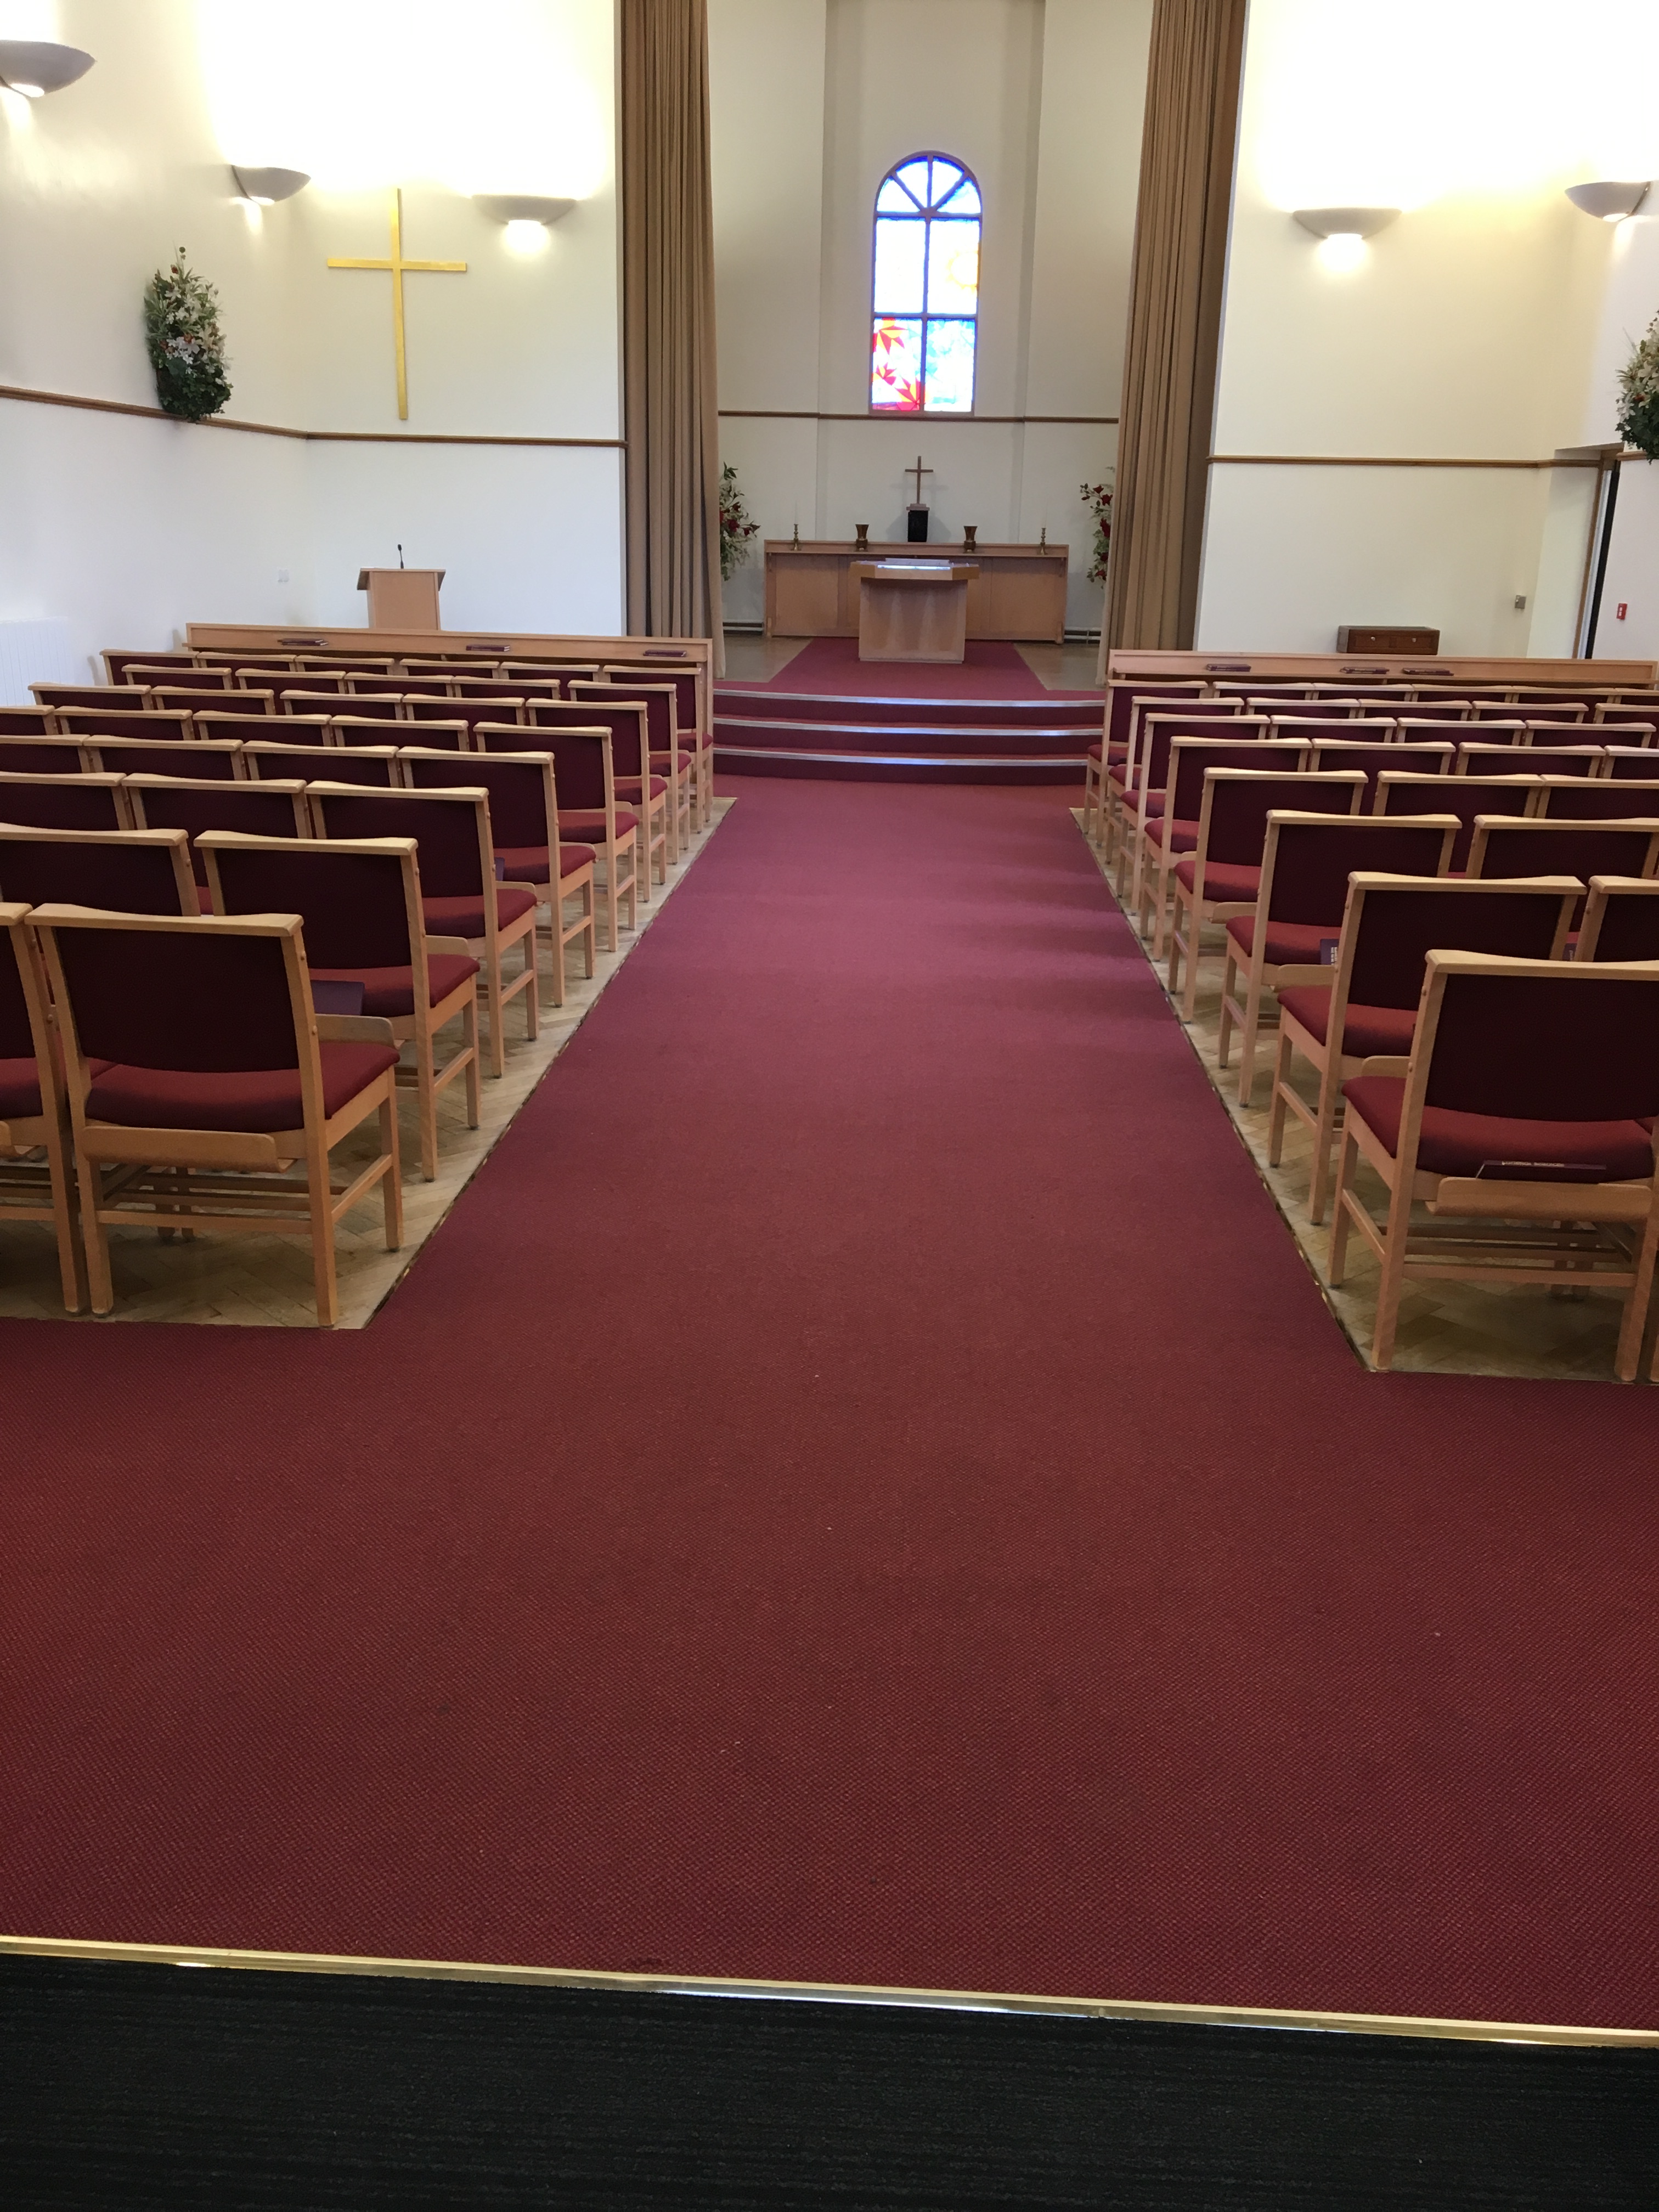 Ardsley Crematorium in Barnsley - the finished floor covering.